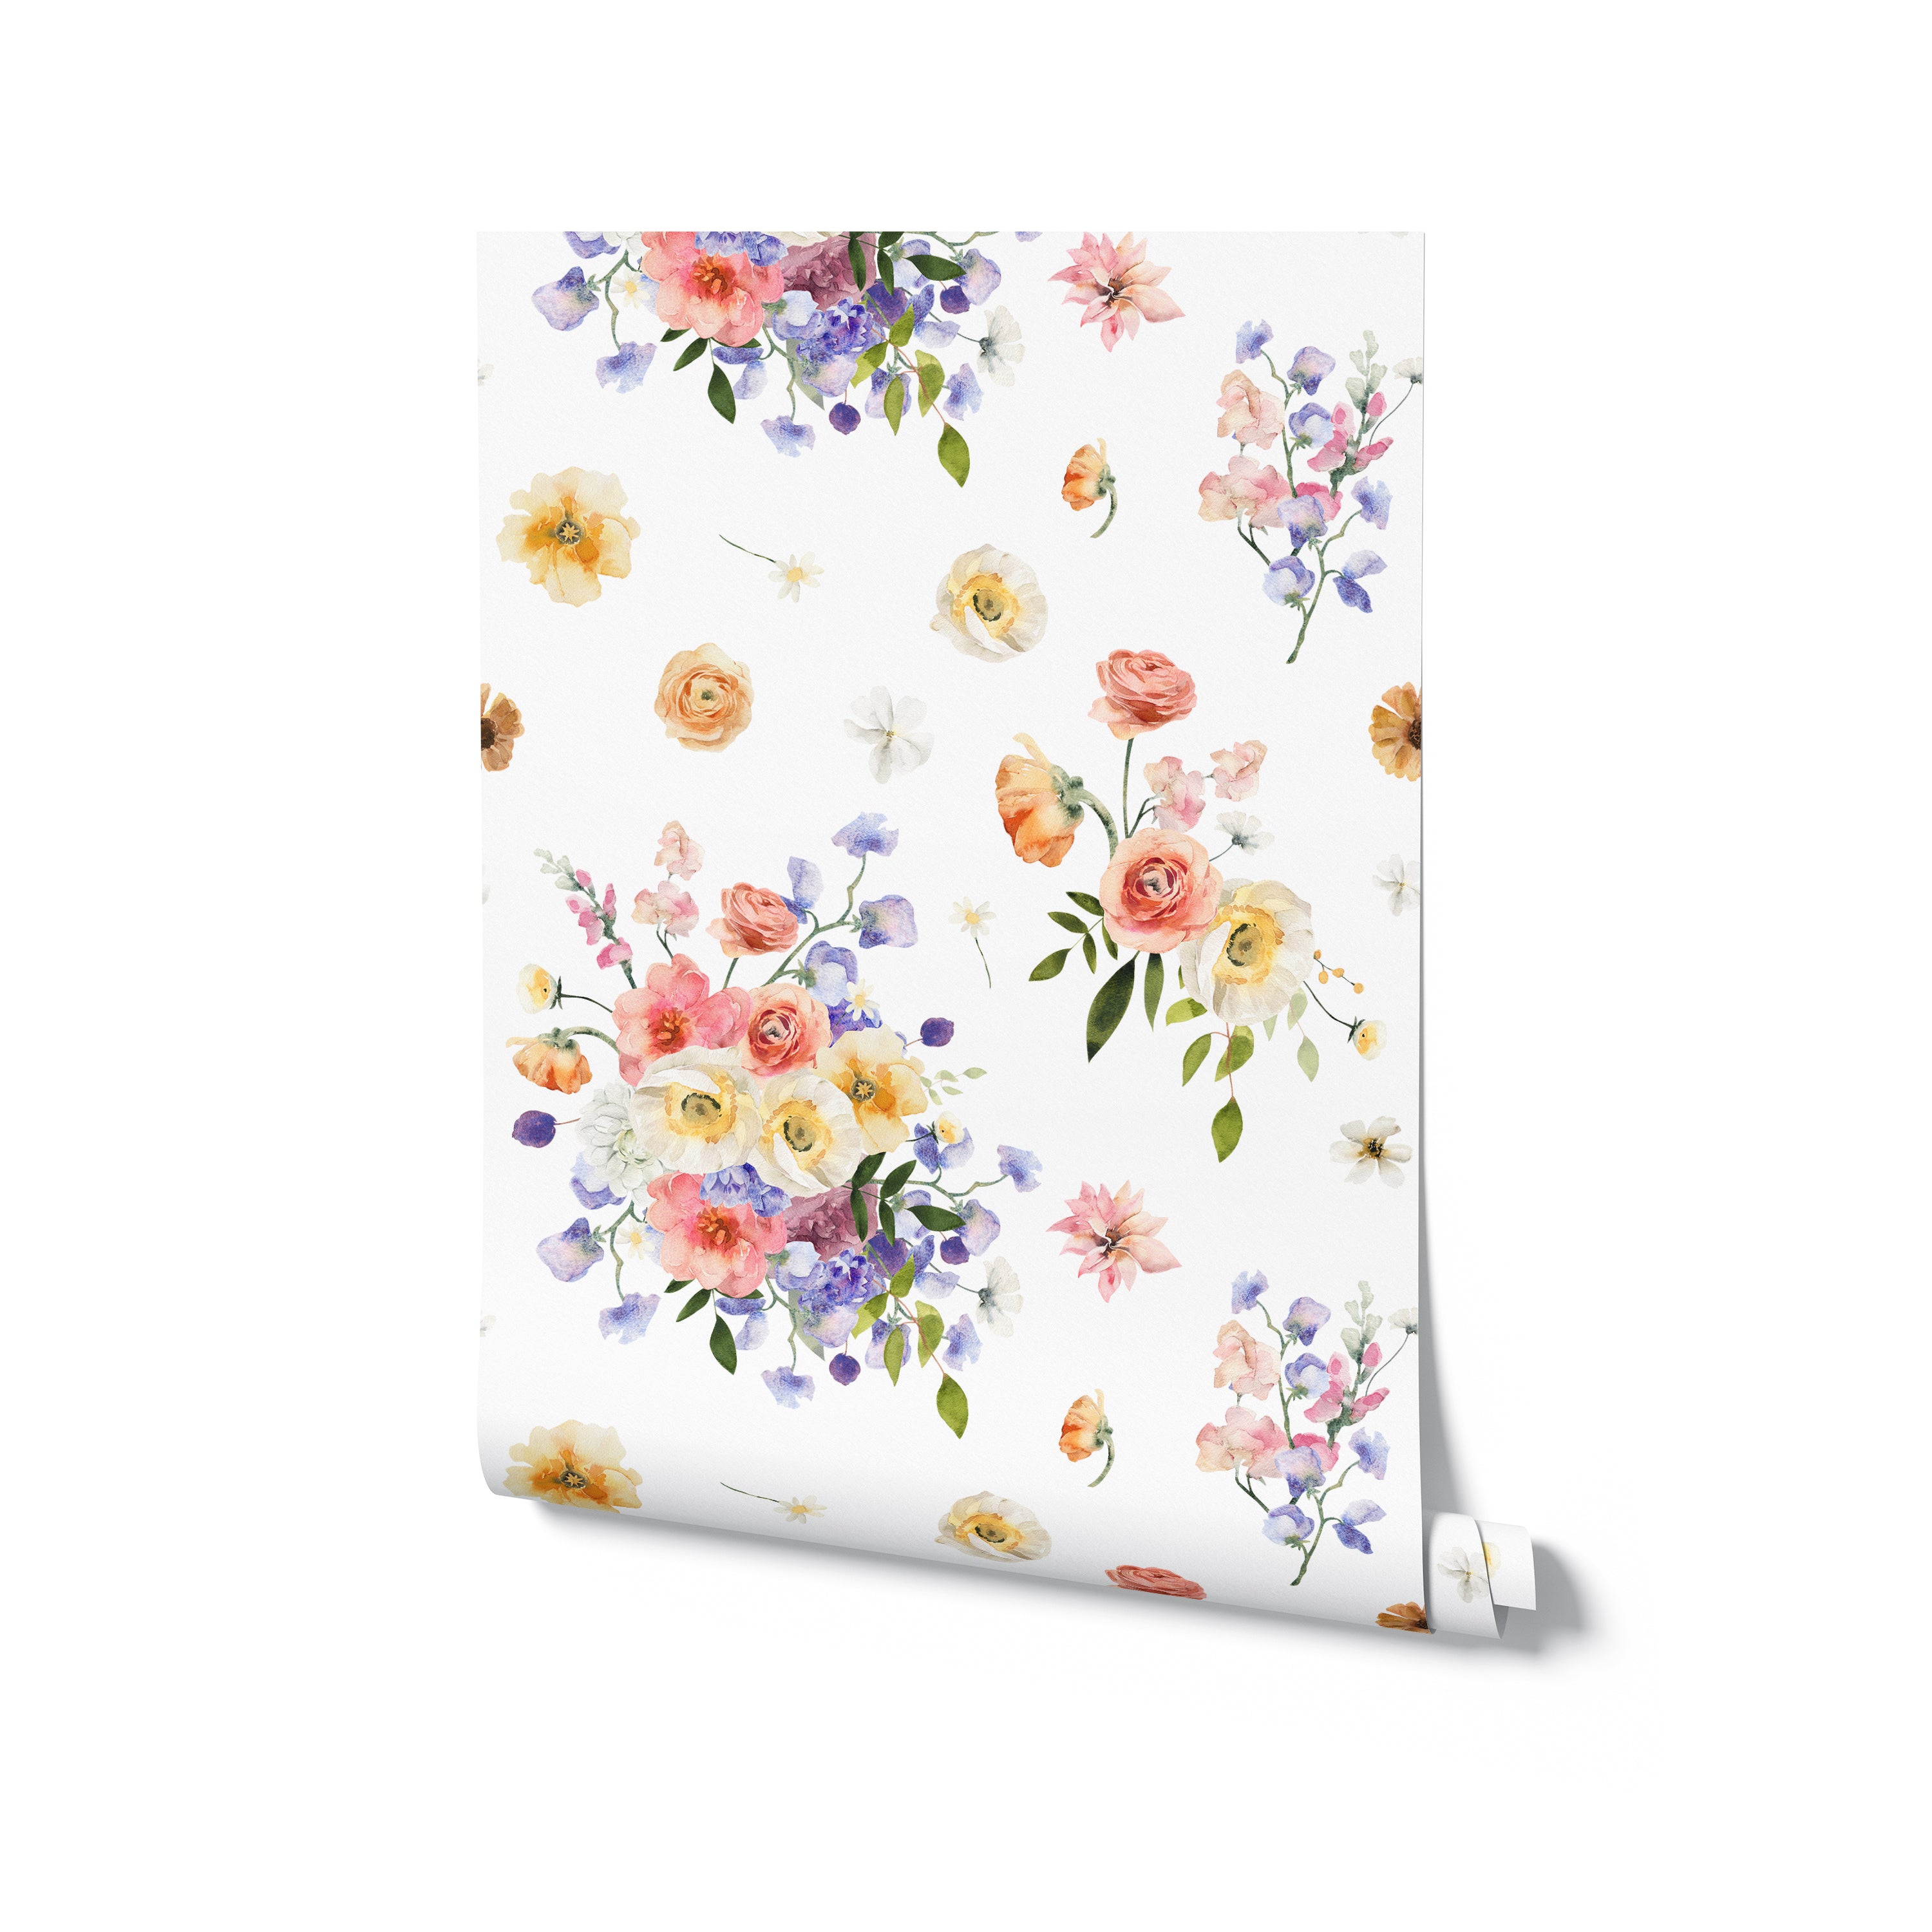 A roll of Bouquet Bliss Wallpaper illustrating the detailed floral pattern with an assortment of garden flowers in vibrant colors on a white background. The design is ideal for creating a focal point in any room, adding both color and a sense of tranquility.